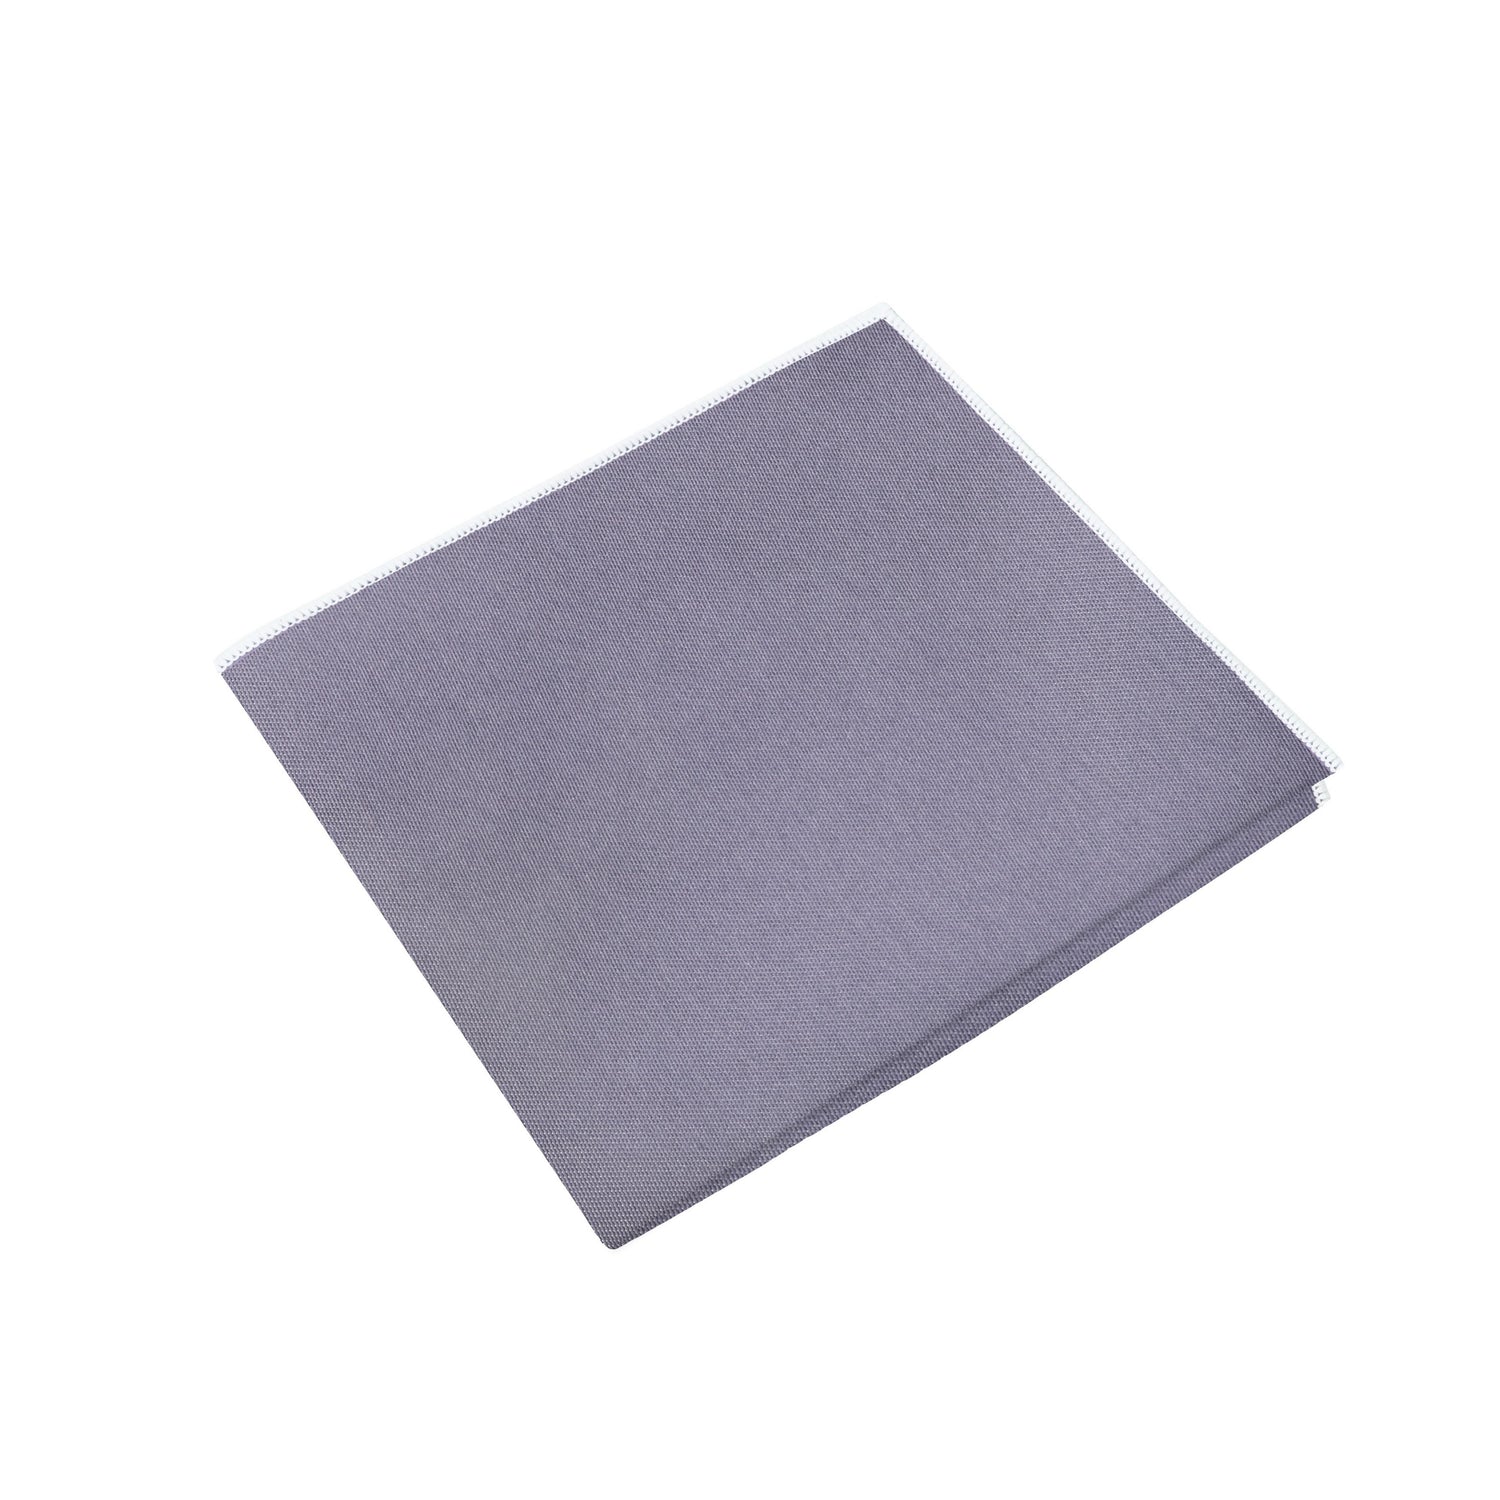 Grey with White Edges Pocket Square